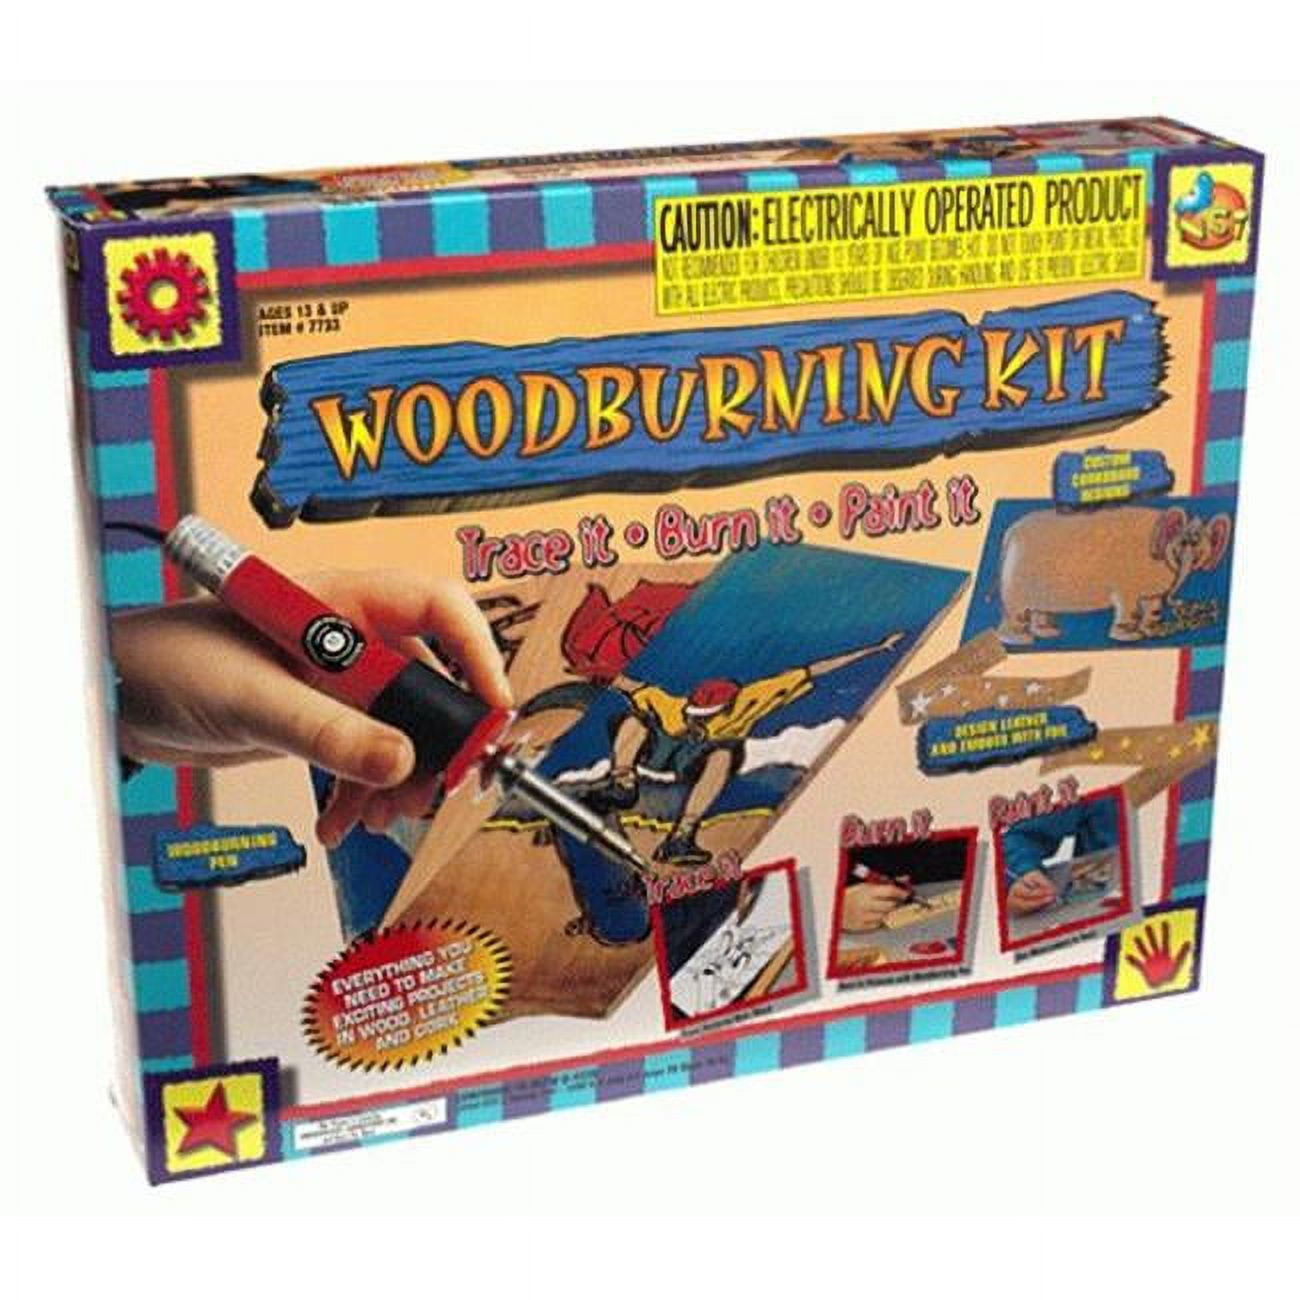 NSI WOODBURNING KIT with 10 PROJECTS in WOOD, LEATHER AND CORK